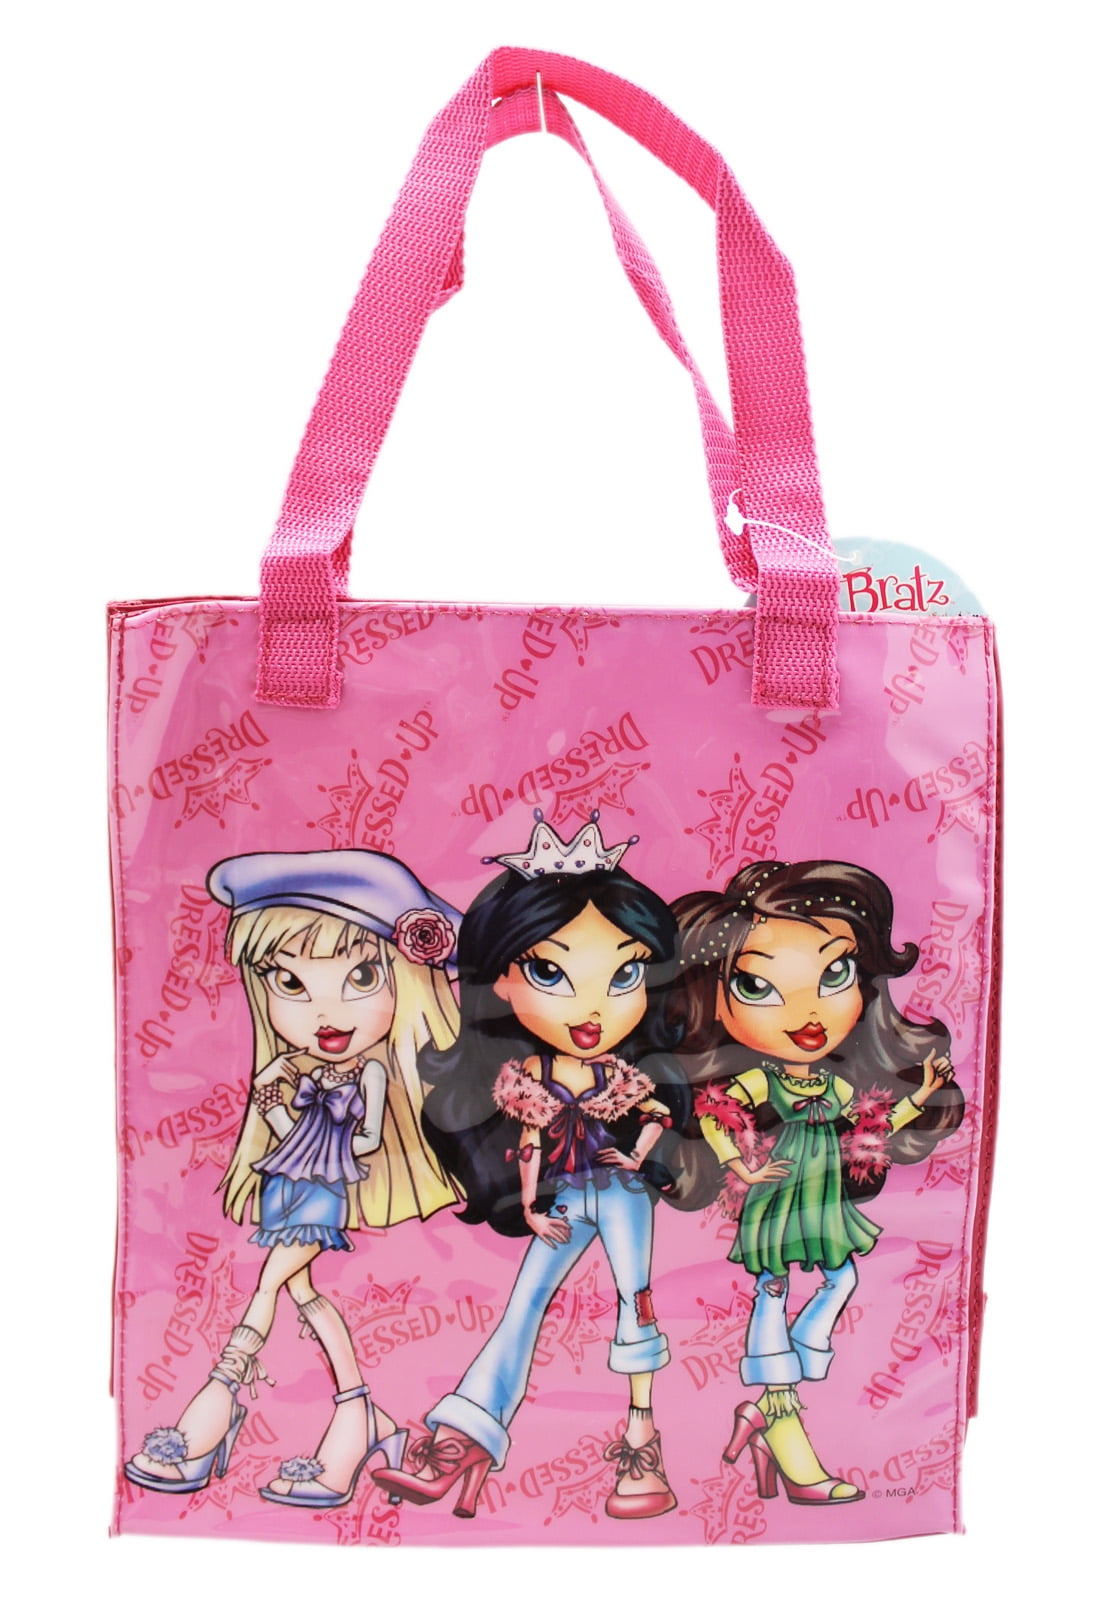 BRATZ DOLL Purse Orange Tote Fabric Shoulder Bag With Girl Picture 